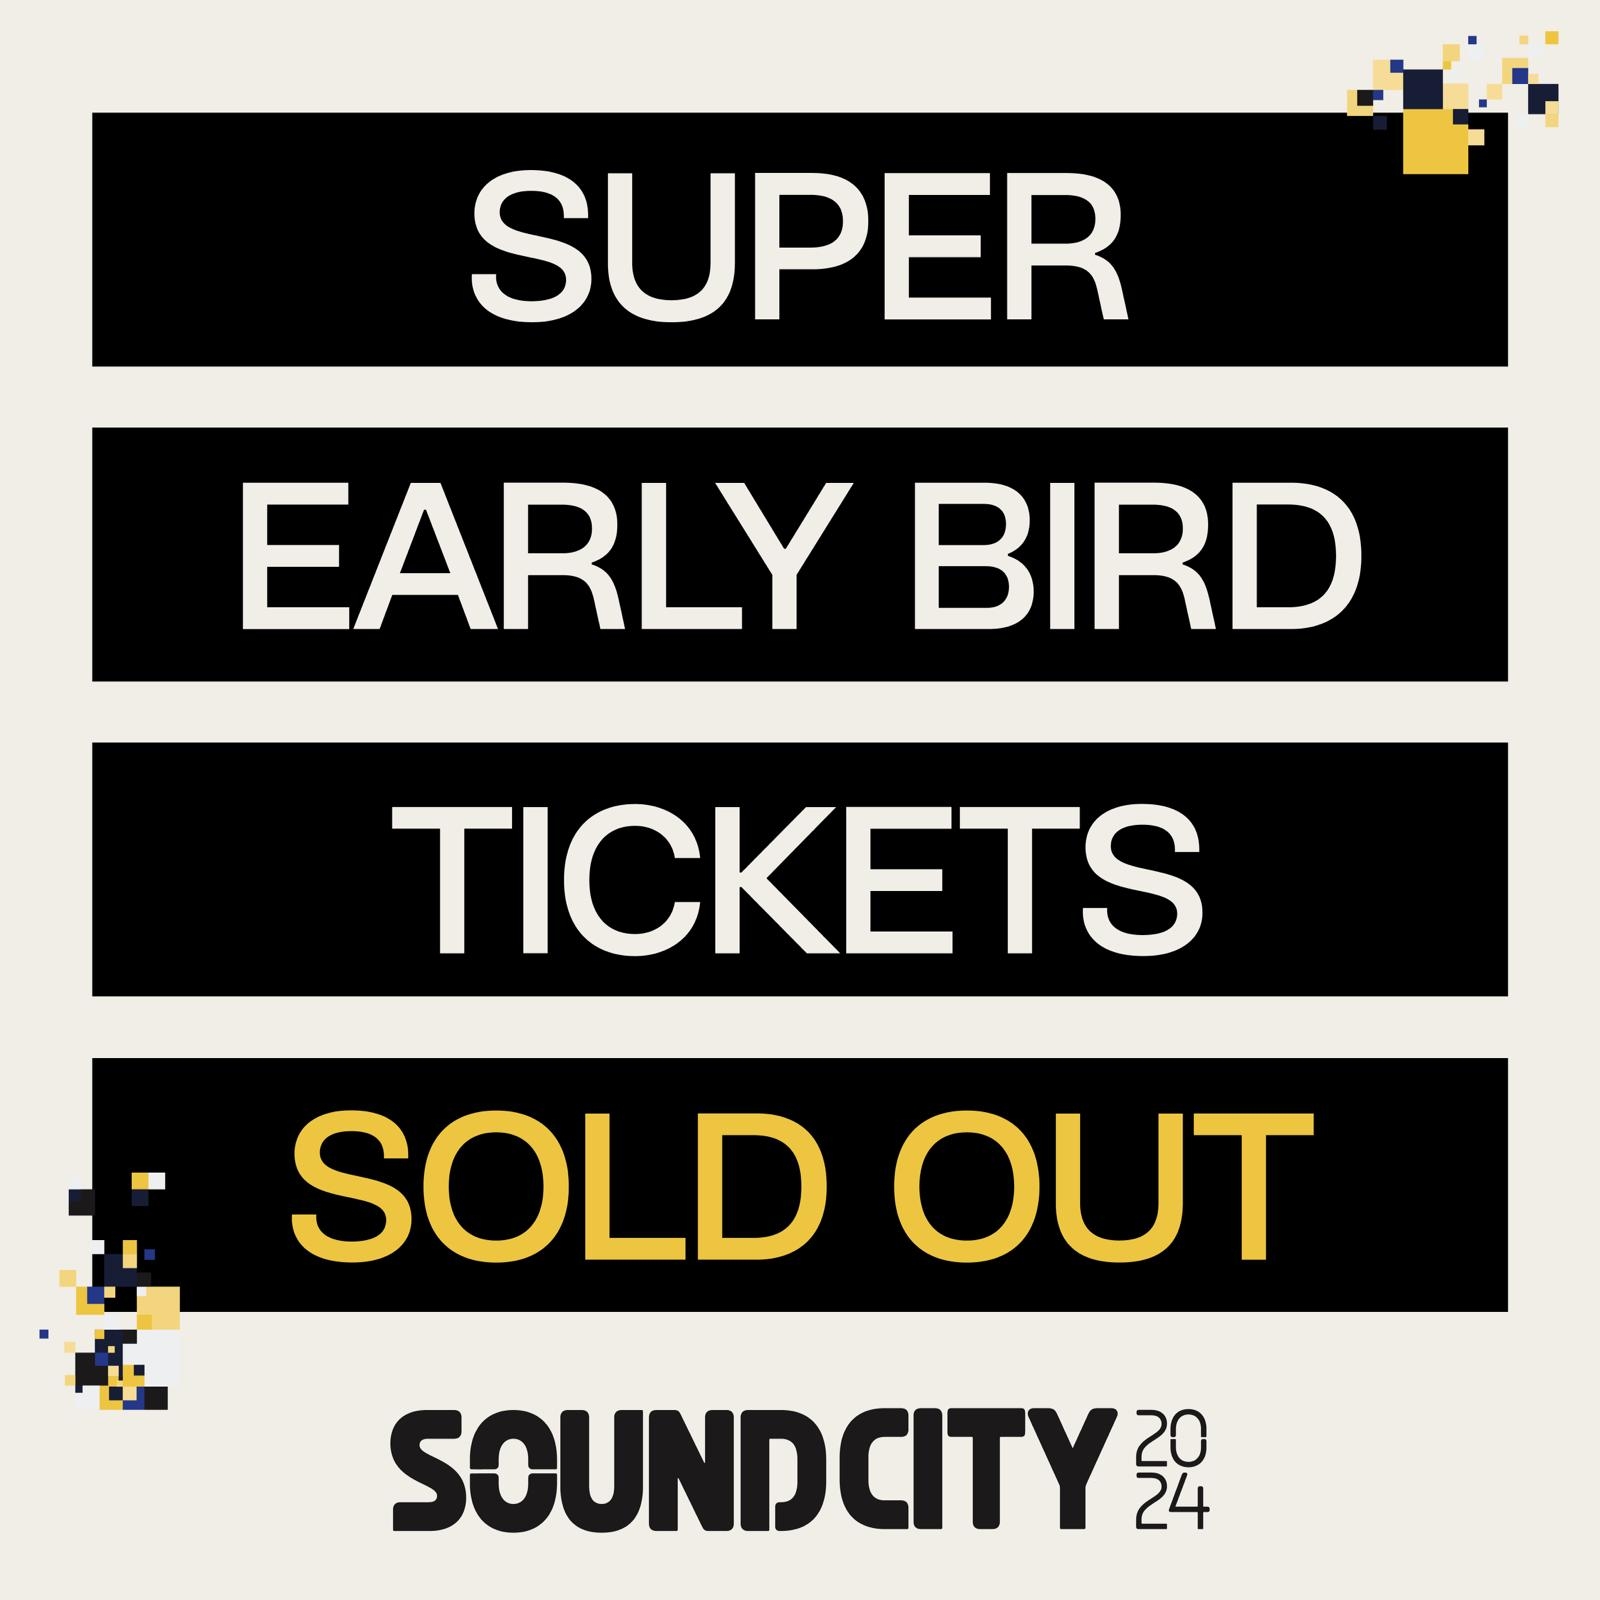 Super Early Bird Tickets Sold Out!